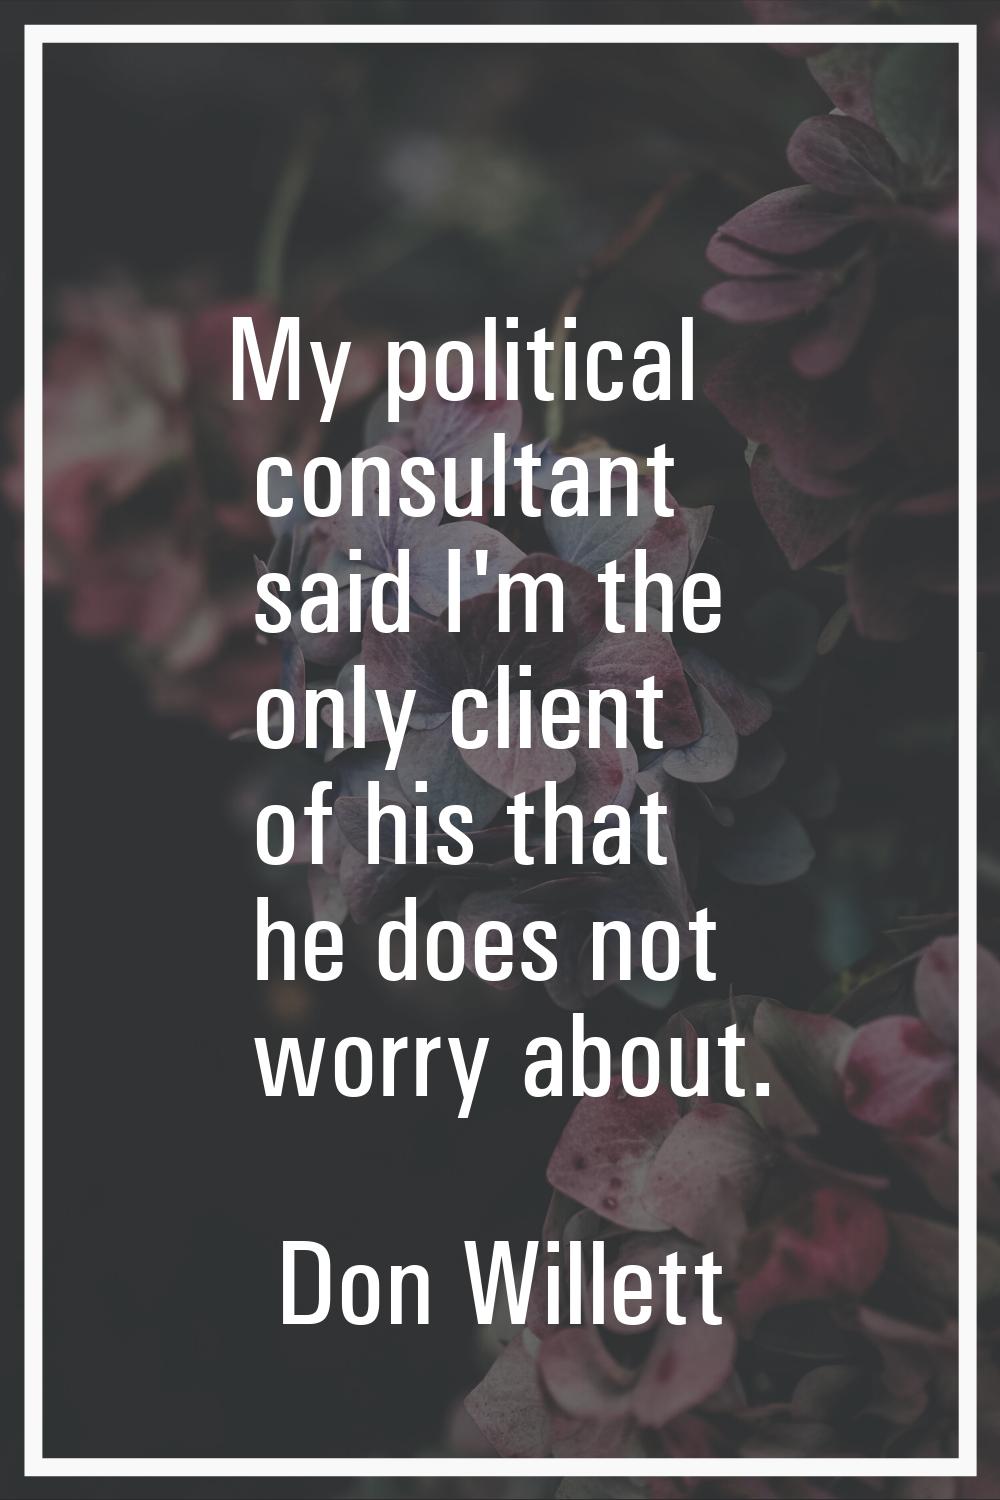 My political consultant said I'm the only client of his that he does not worry about.